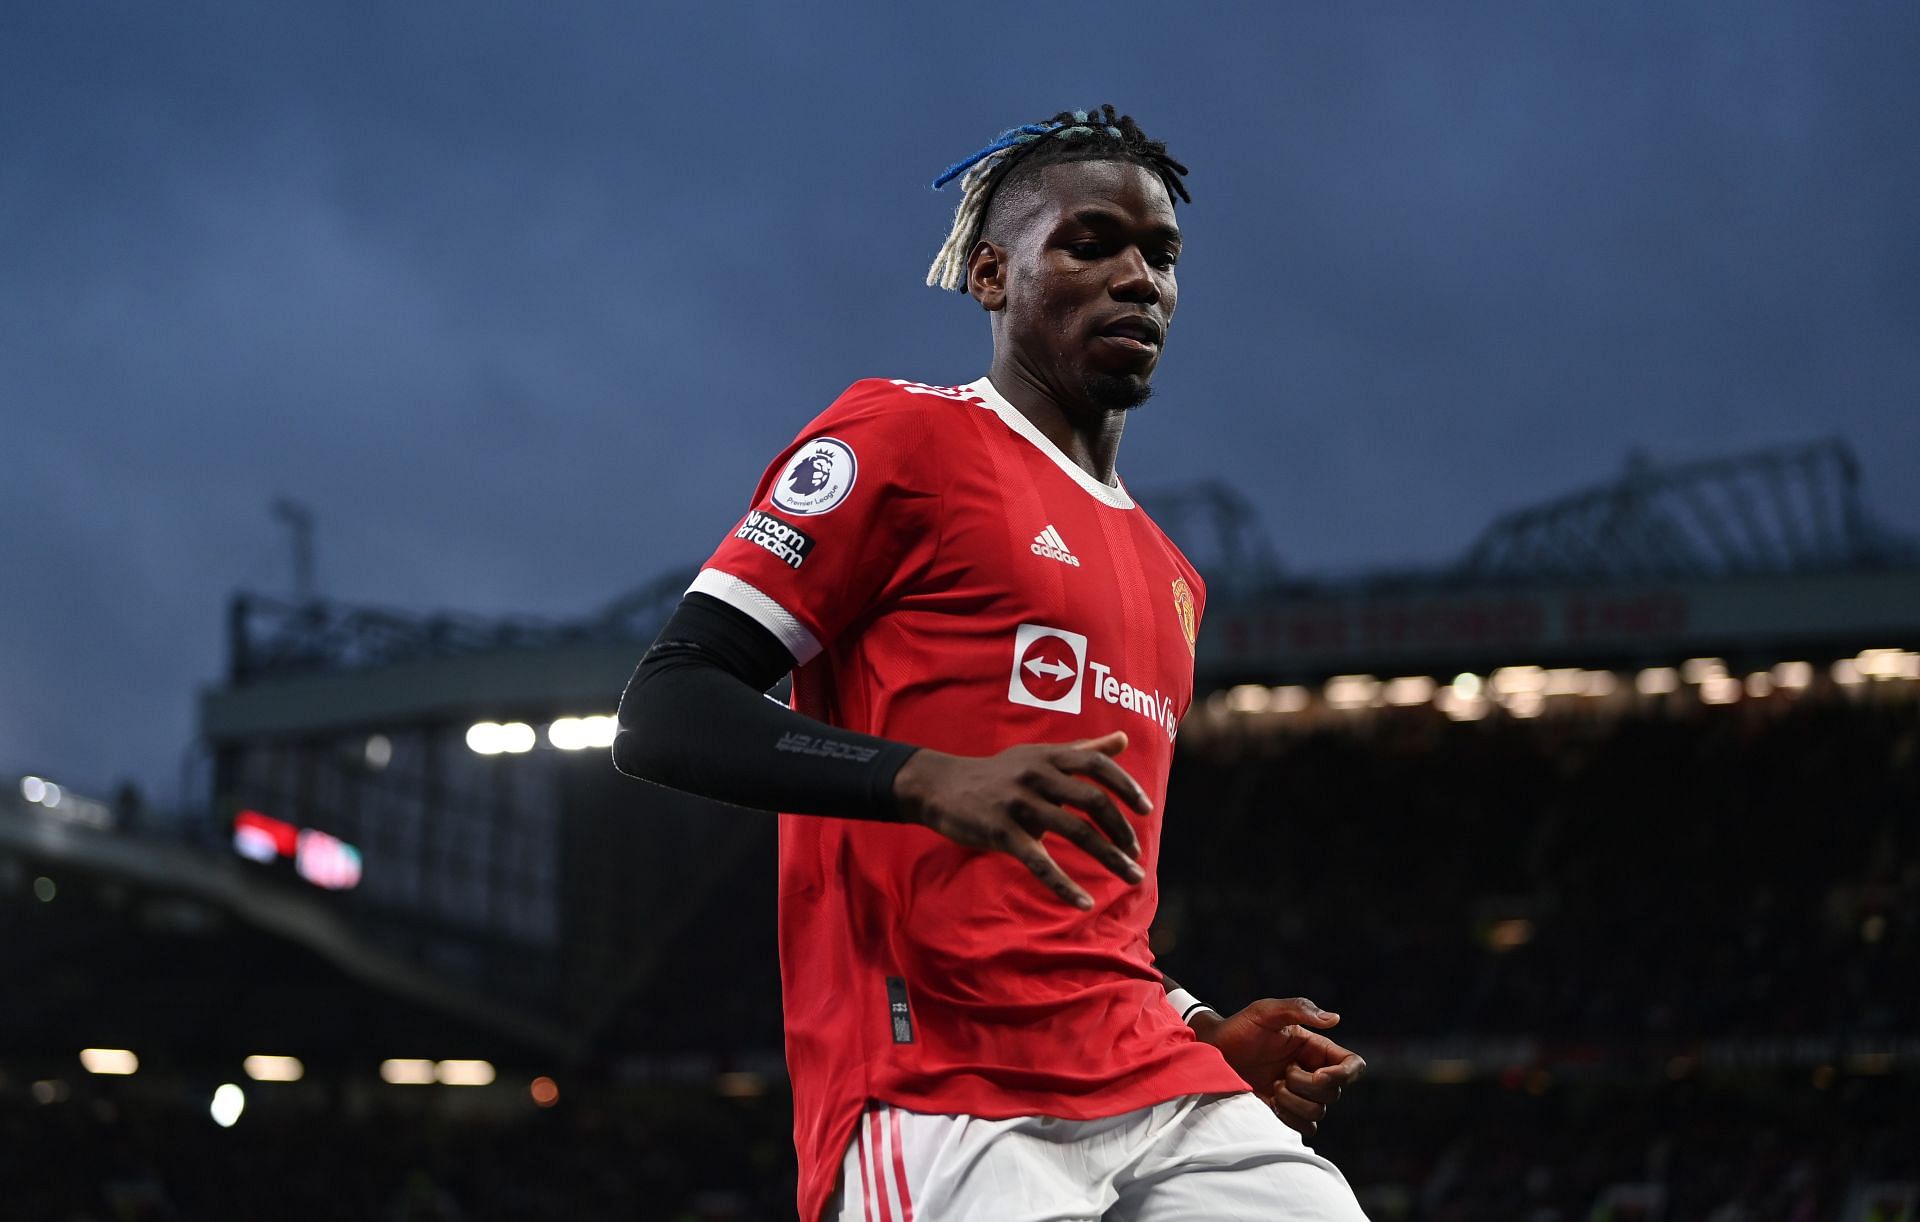 Paul Pogba has shown flashes of brilliance but no consistency at Manchester United.